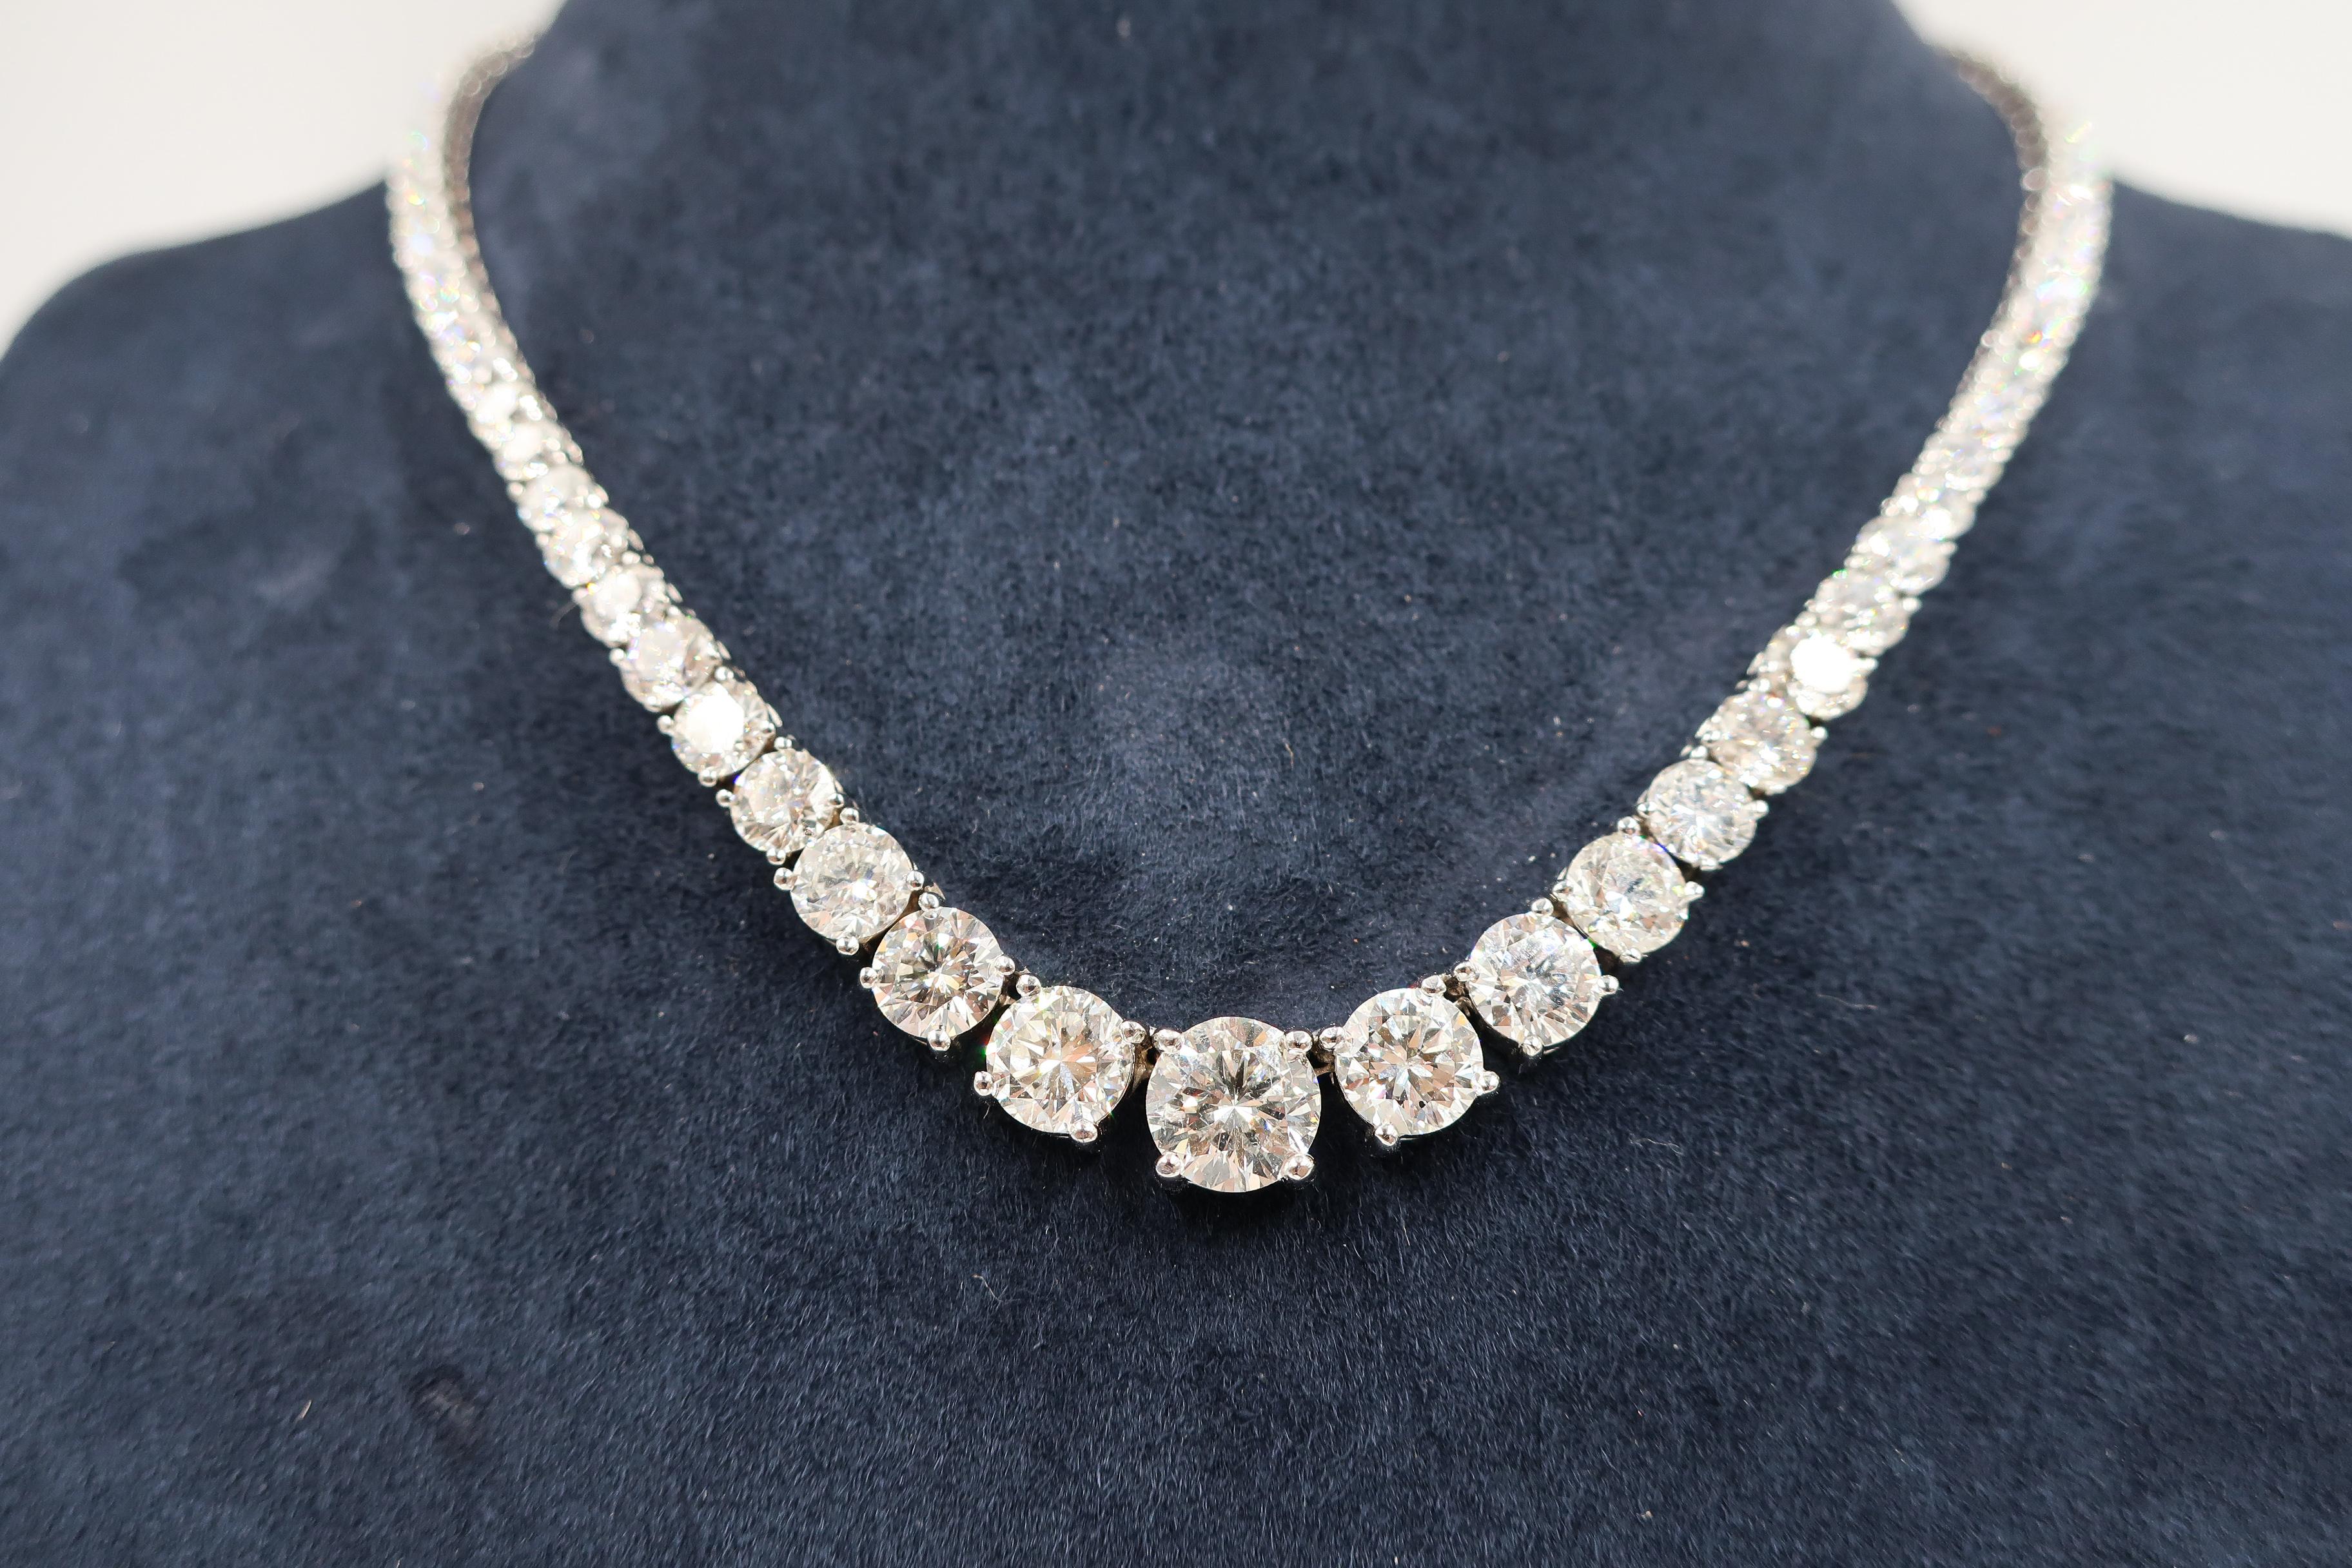 This beautiful graduated in size riviera style diamond necklace features a total of 104 round brilliant cut diamonds weighing a total of 26.46 carats, set in 18K white gold. Diamond Color ranges from D-F, SI clarity

Style available in different